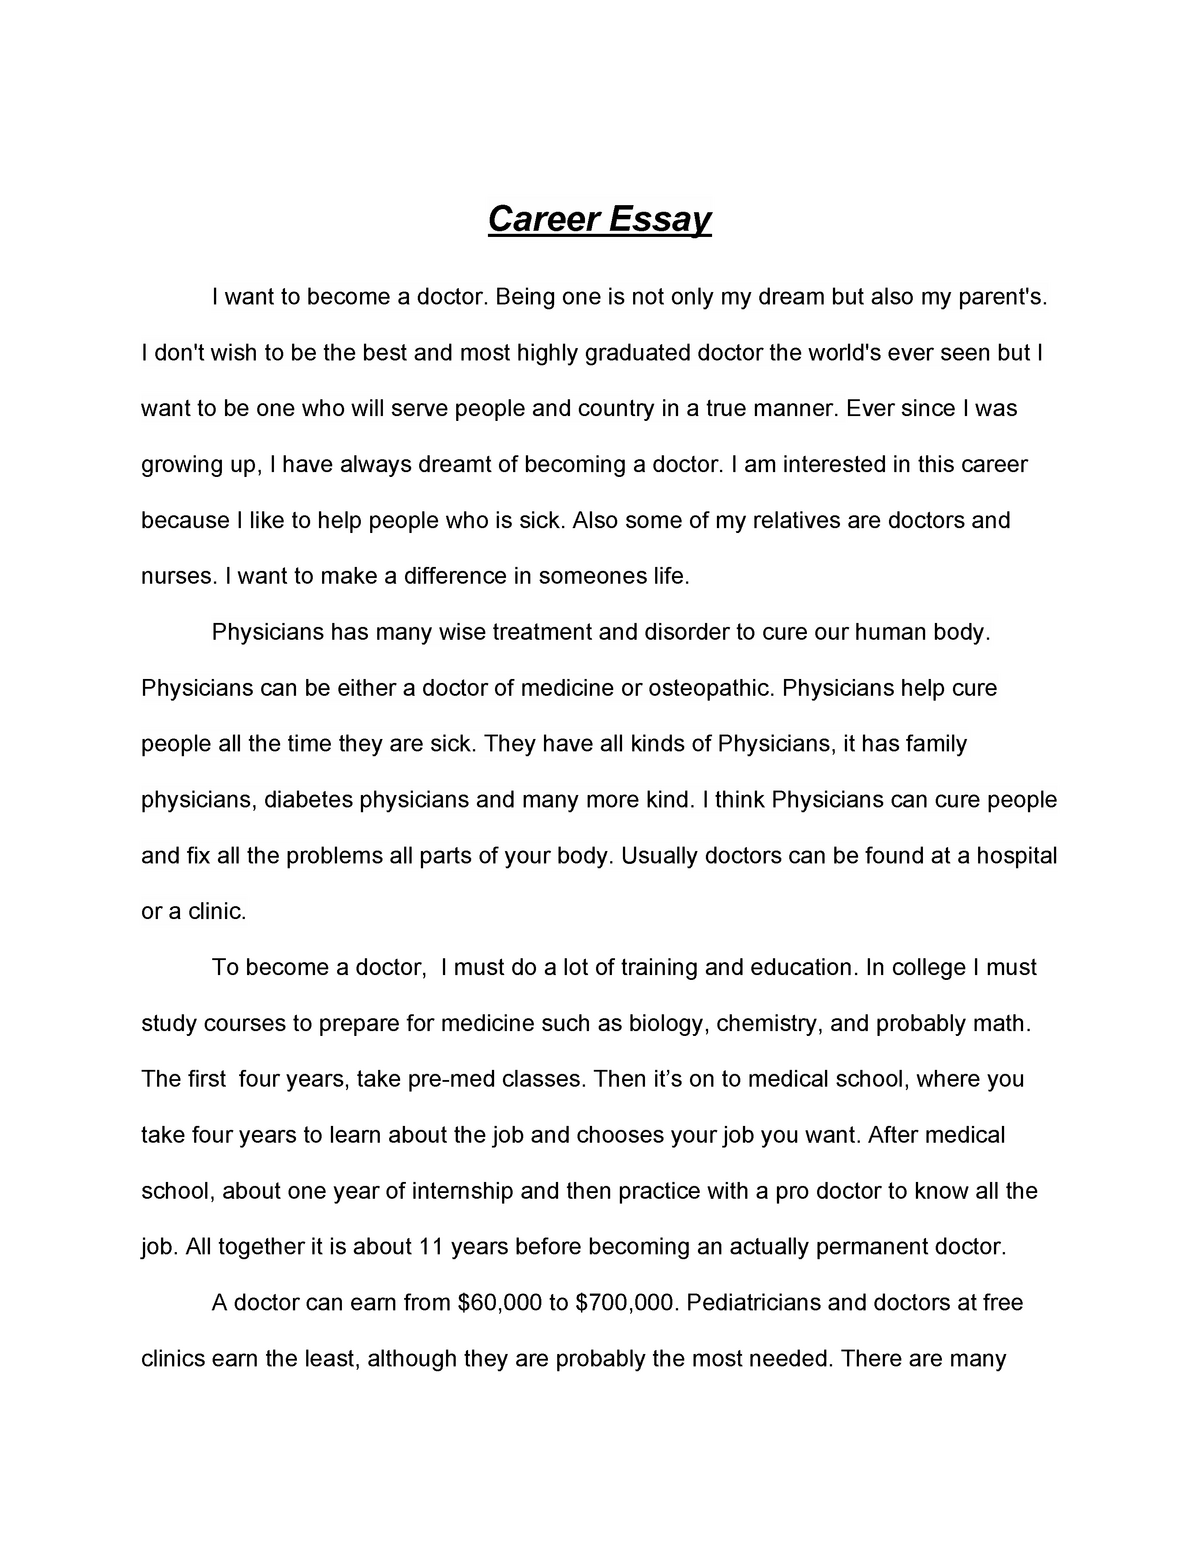 How to write literature essay conclusion